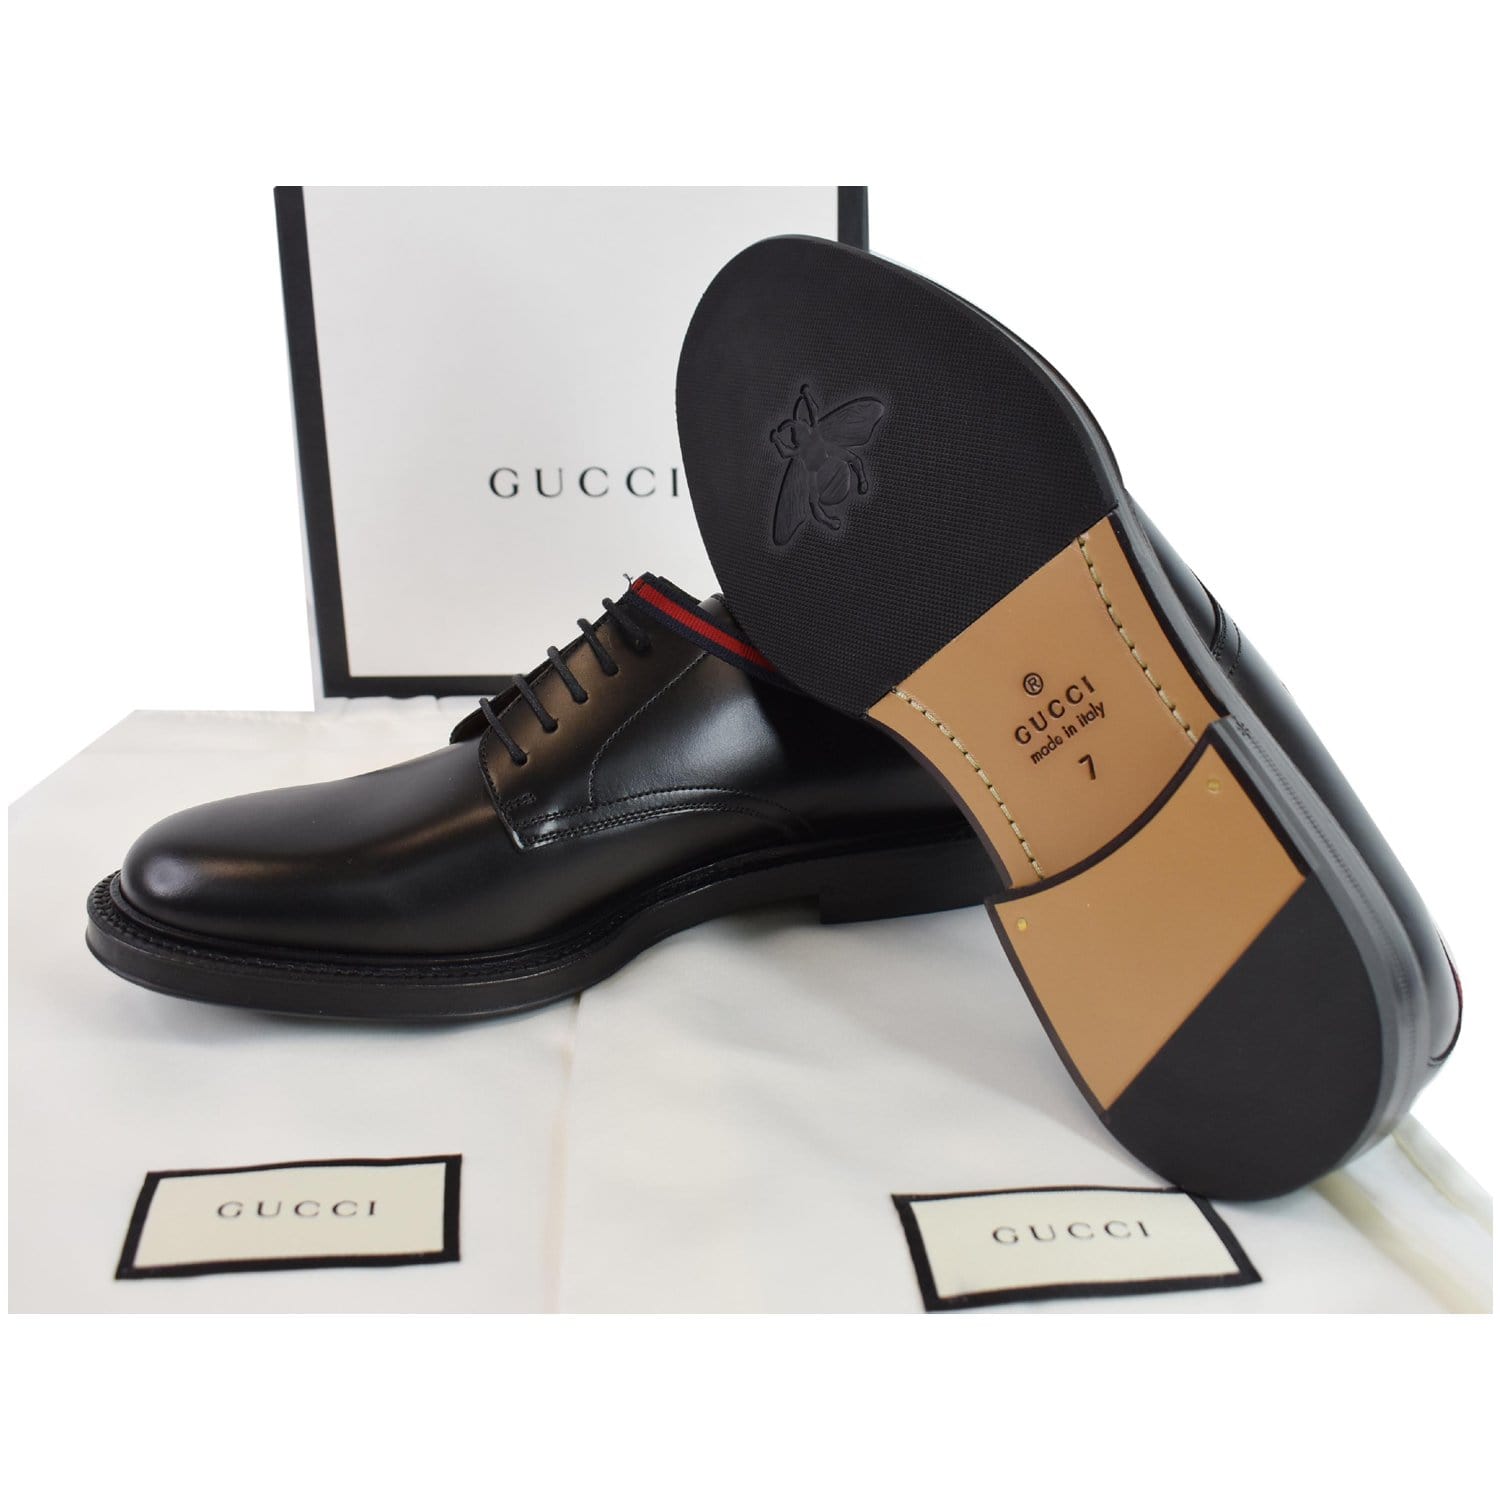 forbandelse specificere Amazon Jungle Gucci Classic Web Lace Up Shiny Leather Shoes Black US7